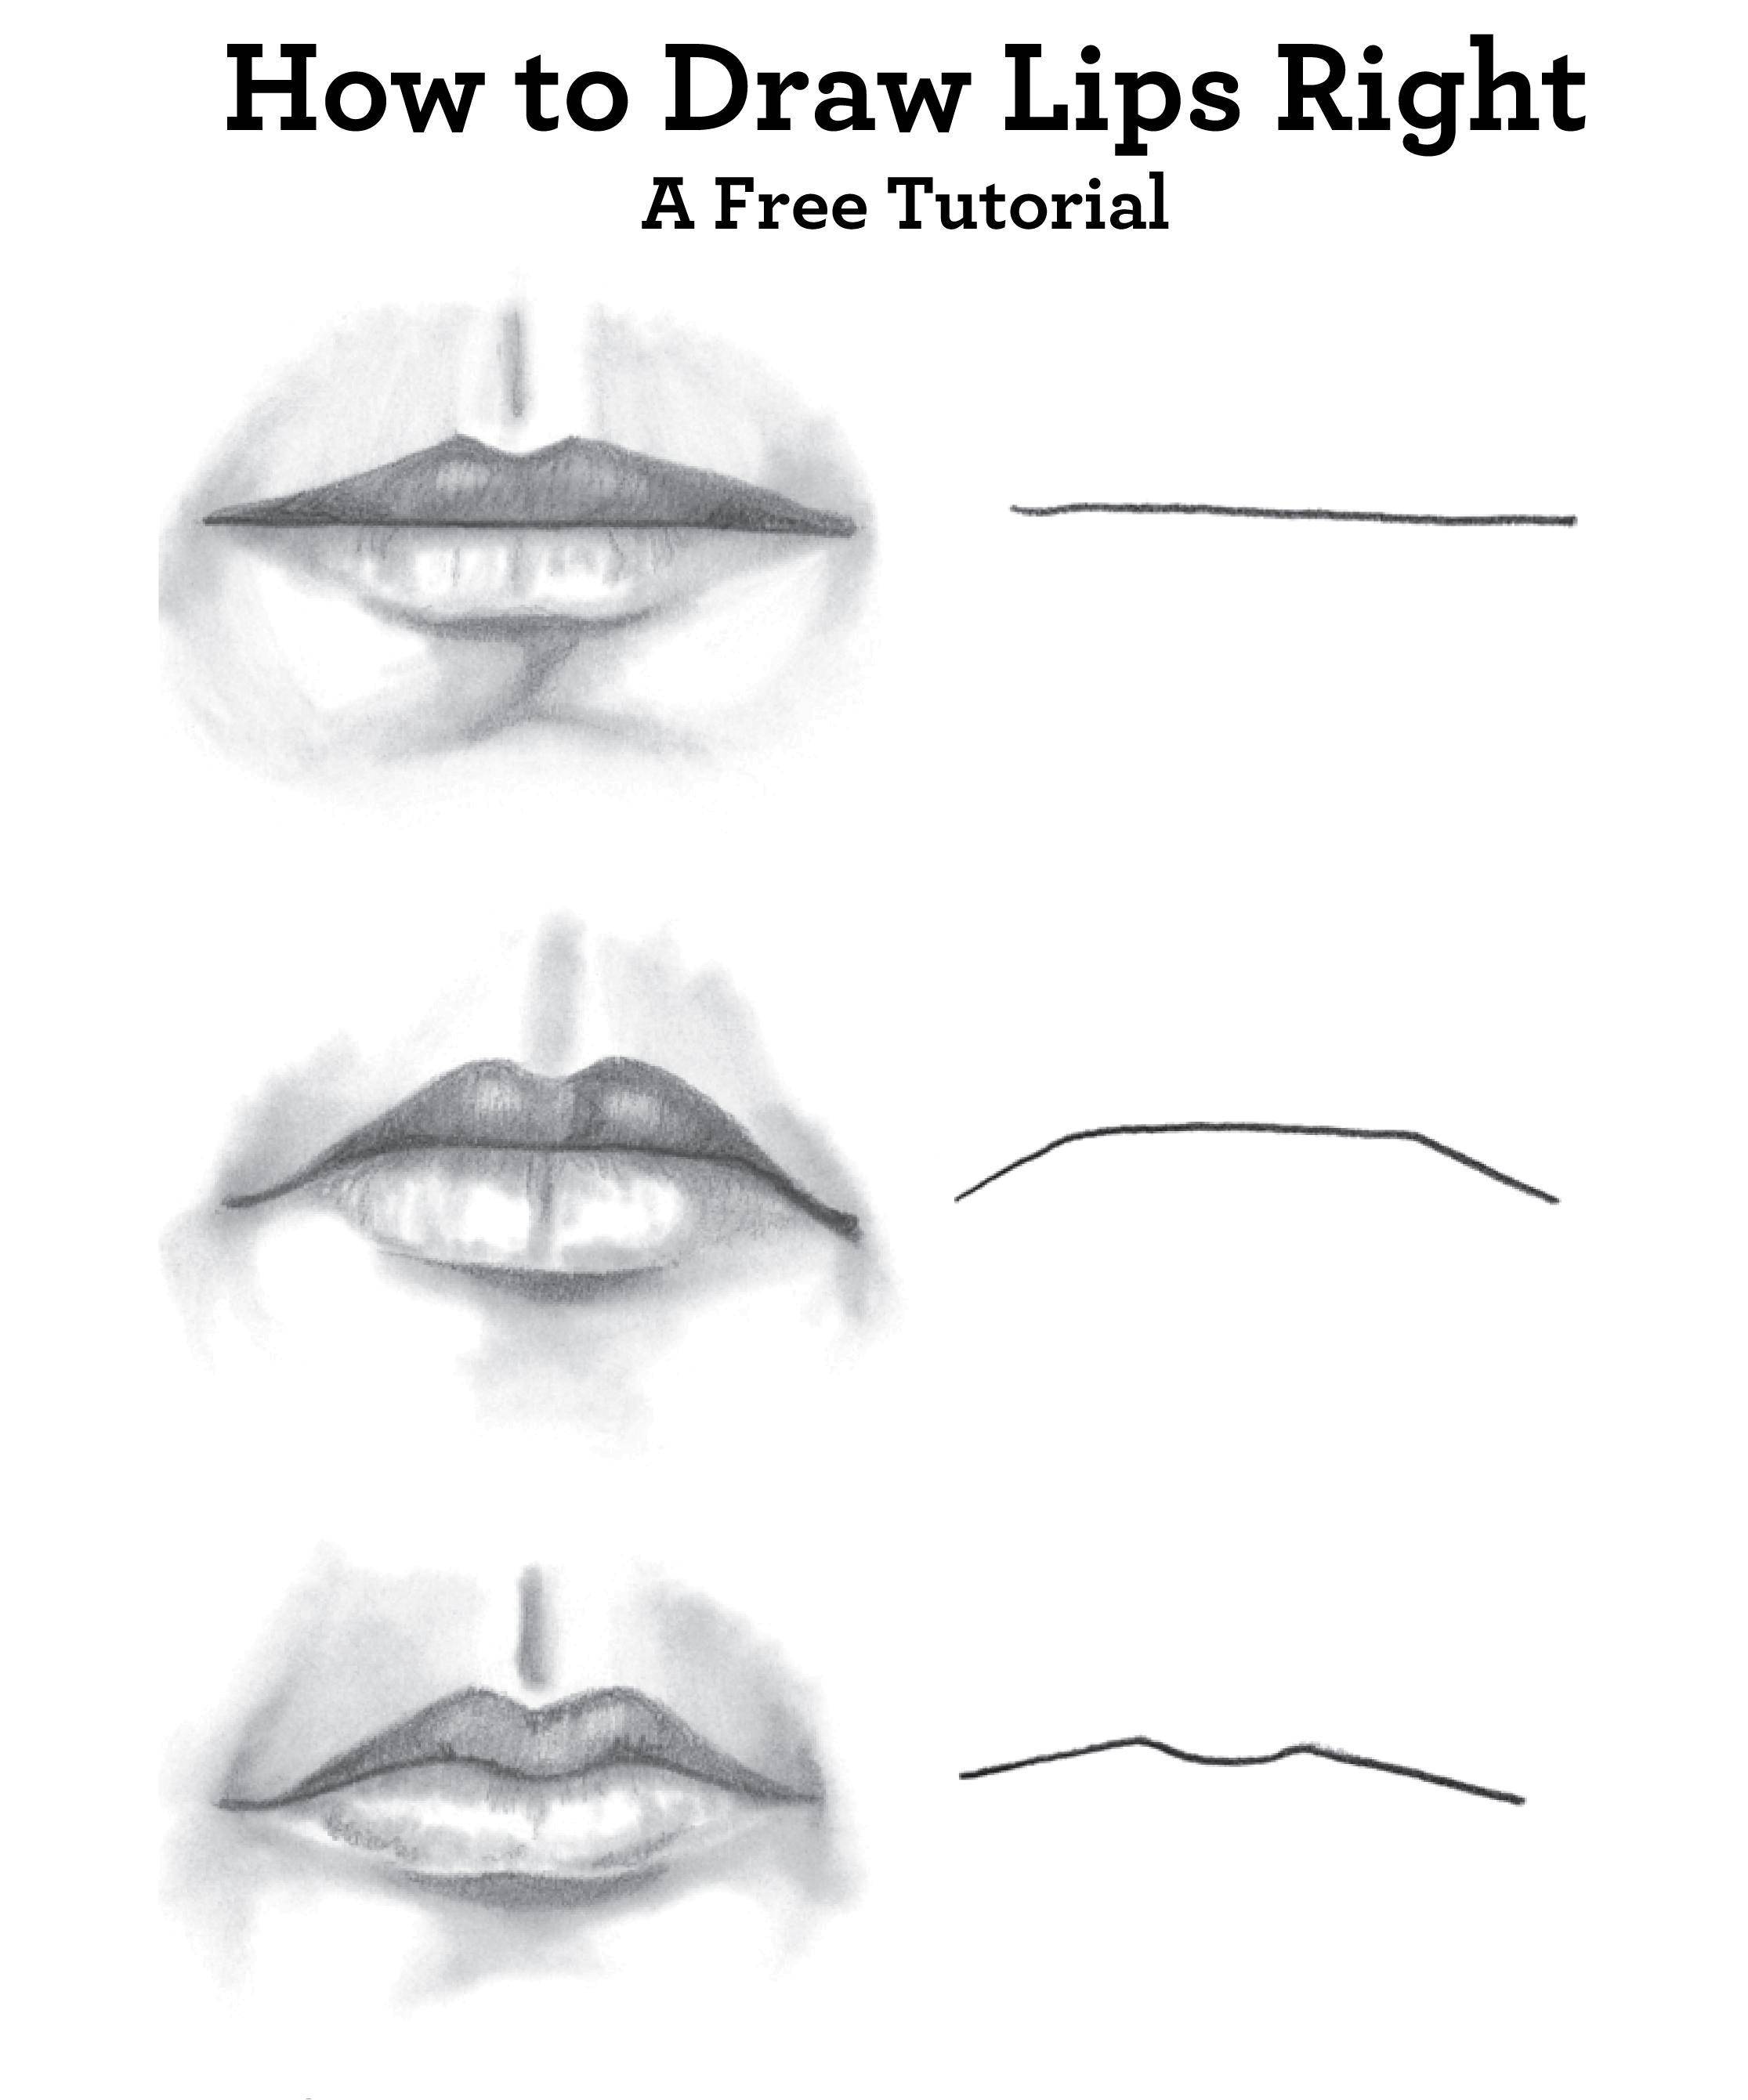 Coloring Draw lips. Category how to draw step by step. Tags:  Step-by-step drawing.